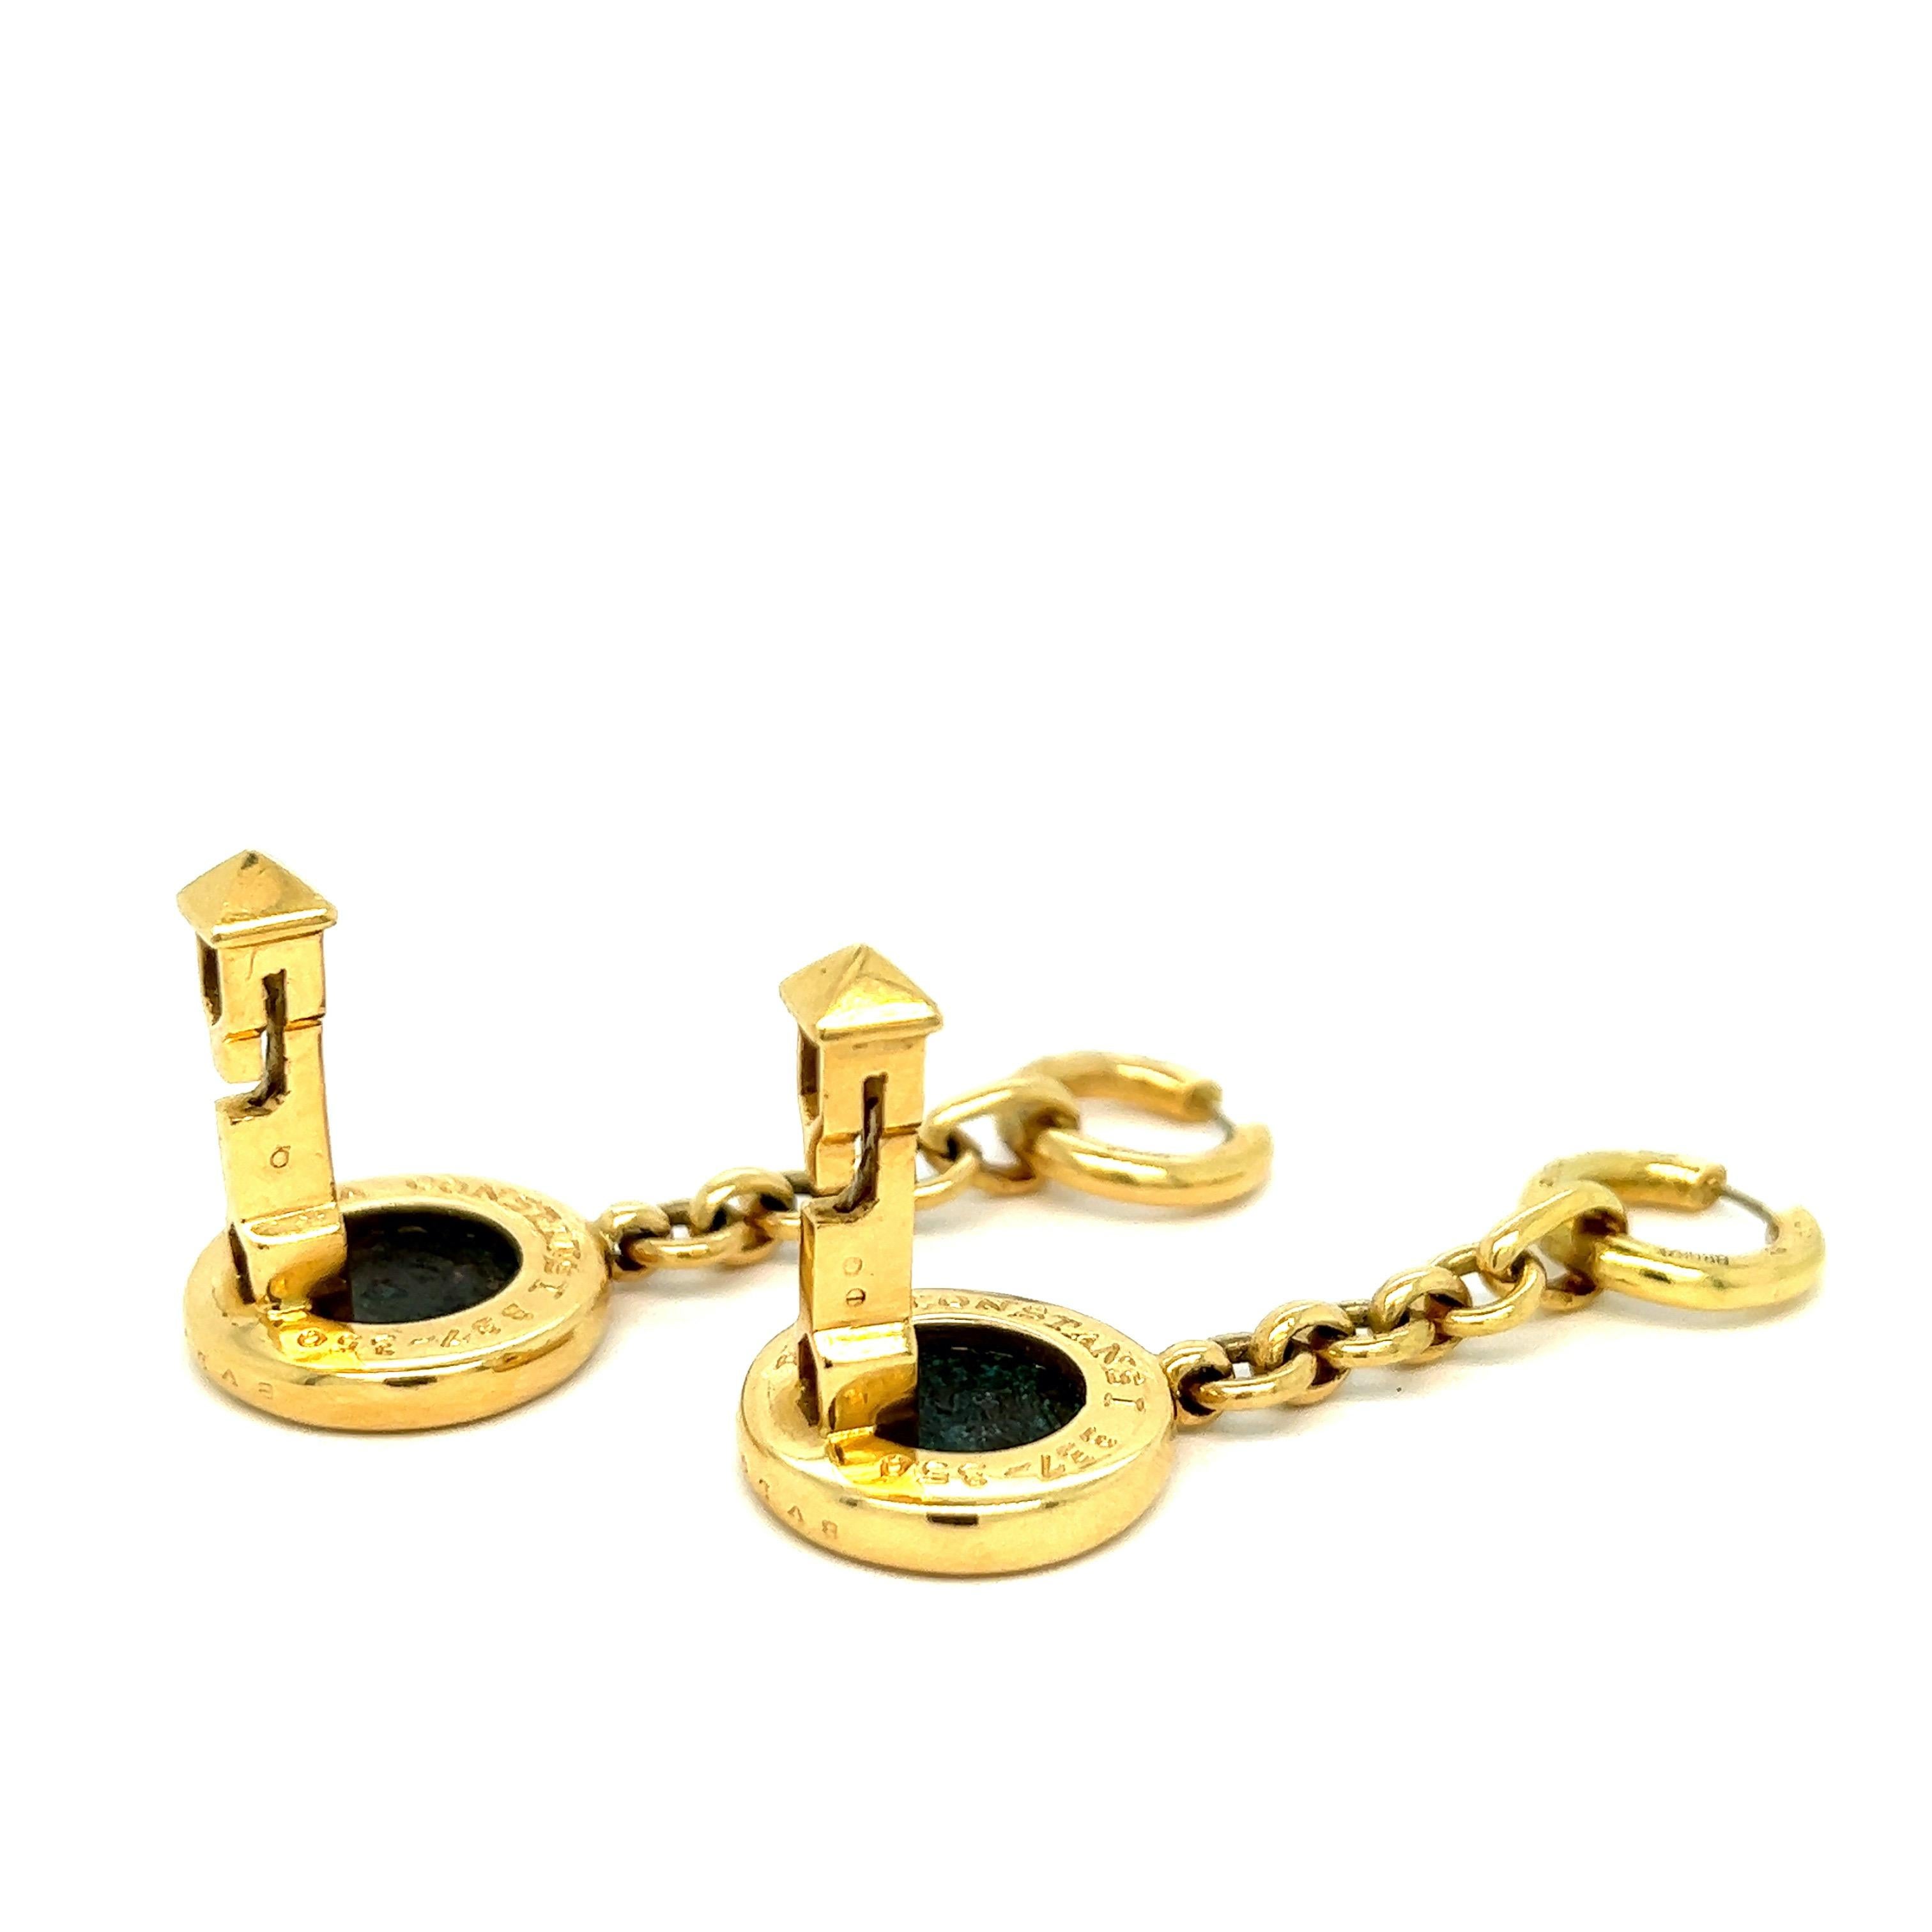 Bvlgari Monete Coin Gold Cufflinks In Excellent Condition For Sale In New York, NY